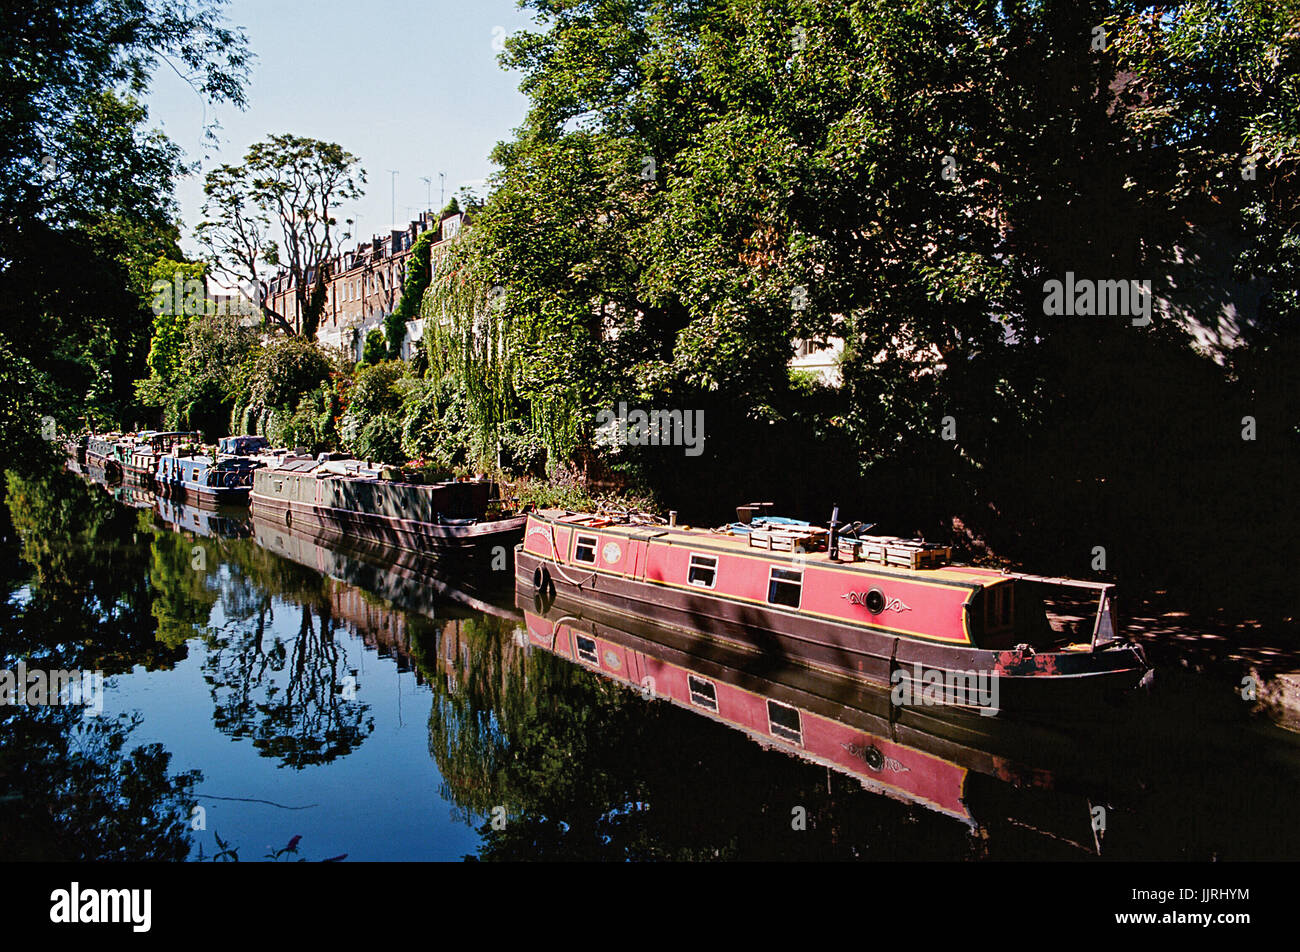 Narrowboats and trees on the Regents Canal at Islington, North London, Great Britain Stock Photo